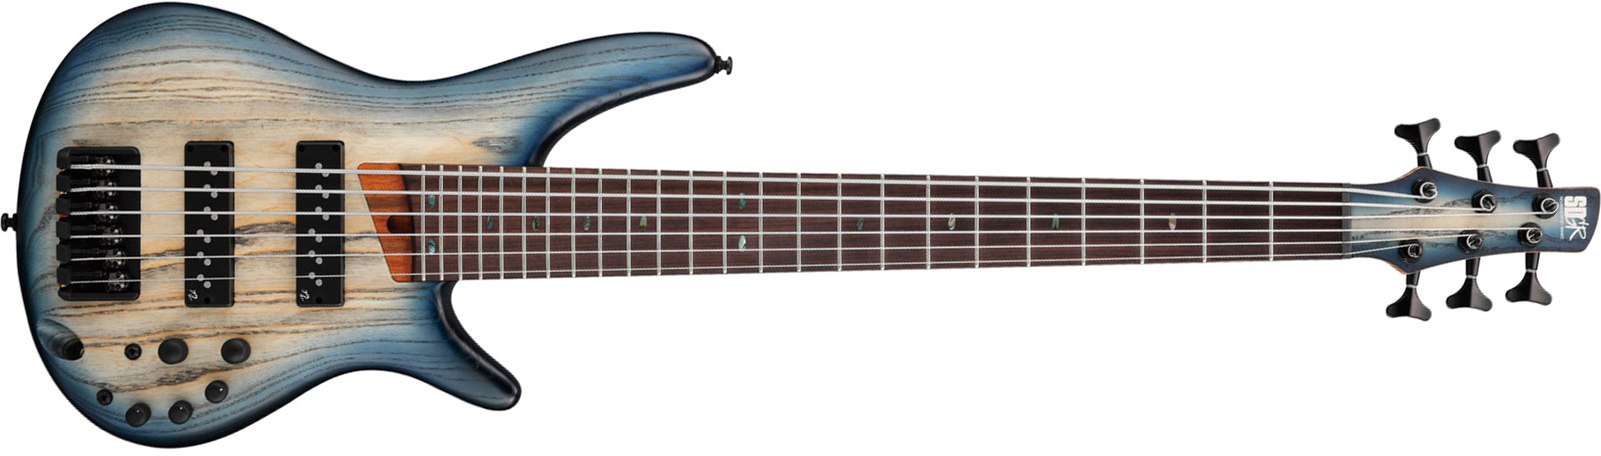 Ibanez Sr606e Ctf Standard 6c Active Rw - Cosmic Blue Starburst Flat - Solid body electric bass - Main picture